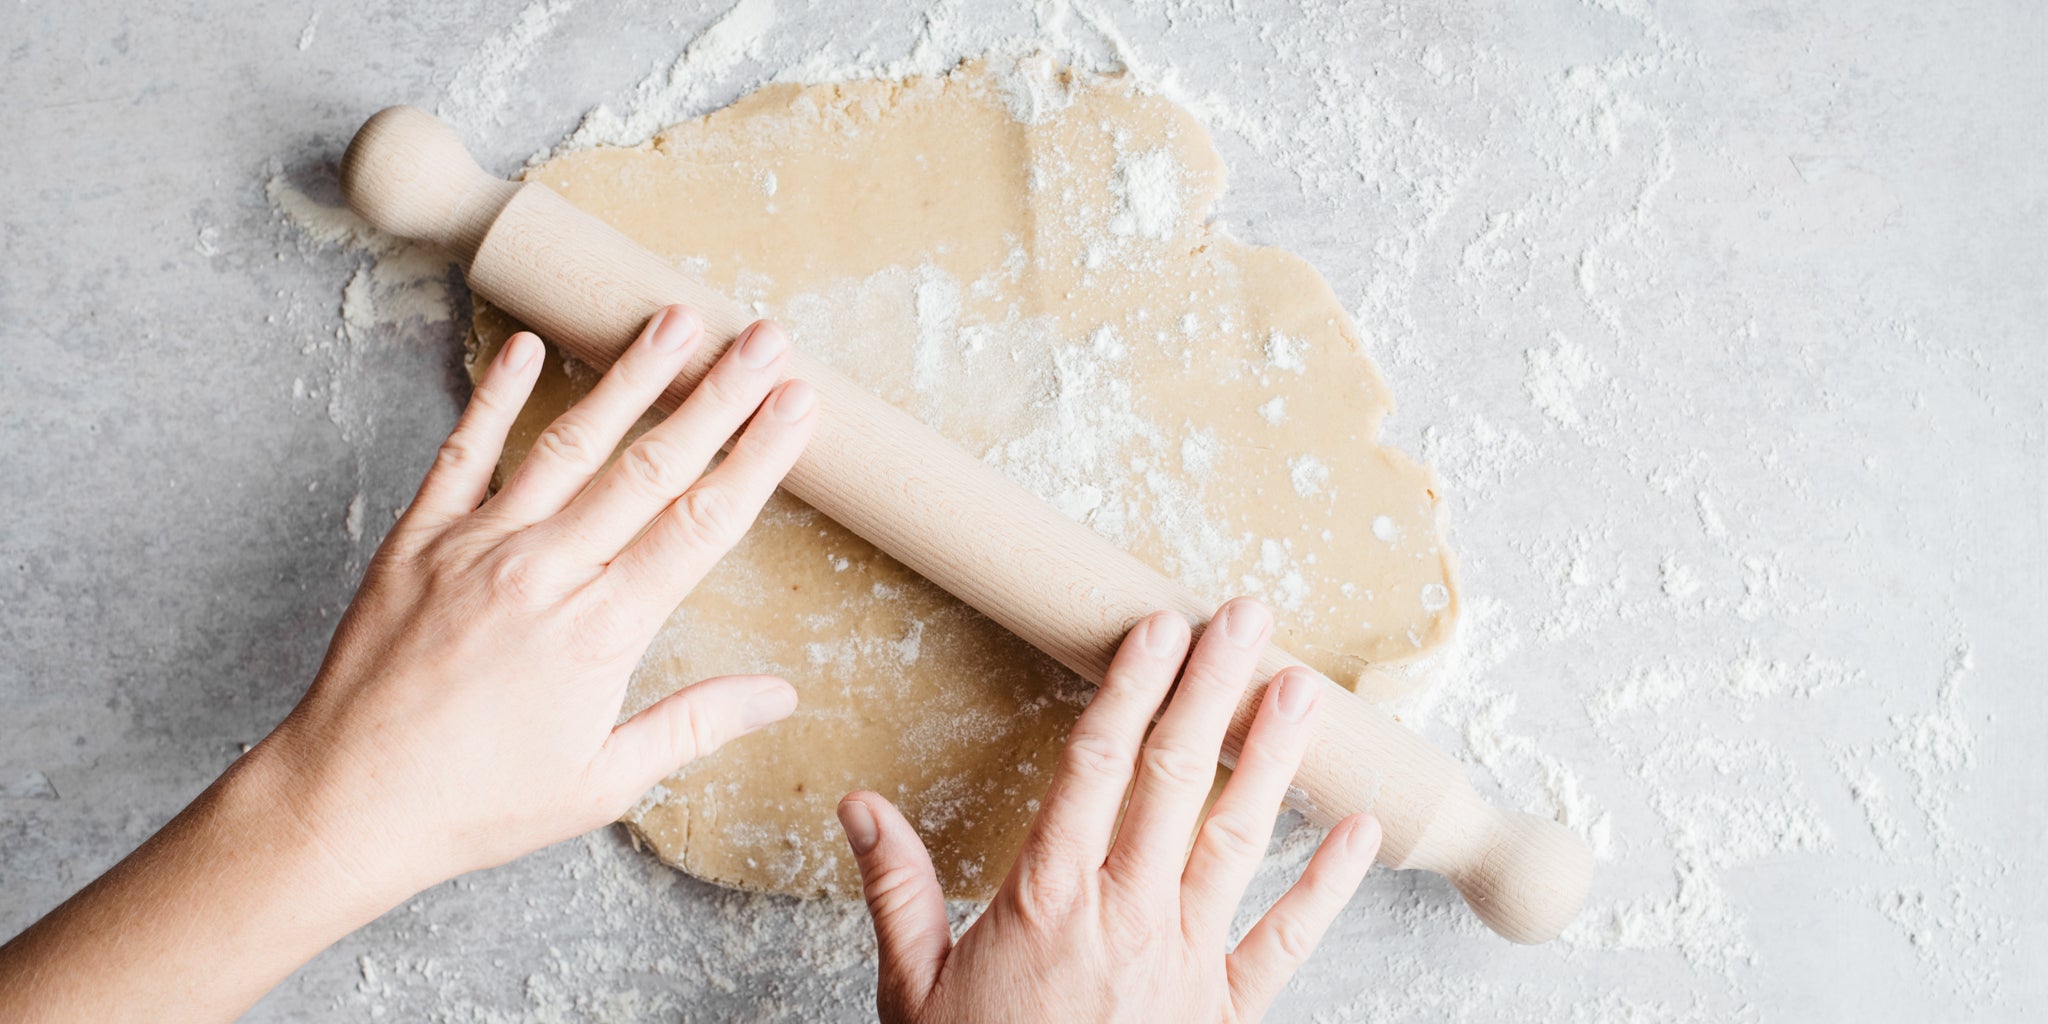 Handing rolling out pastry with rolling pin